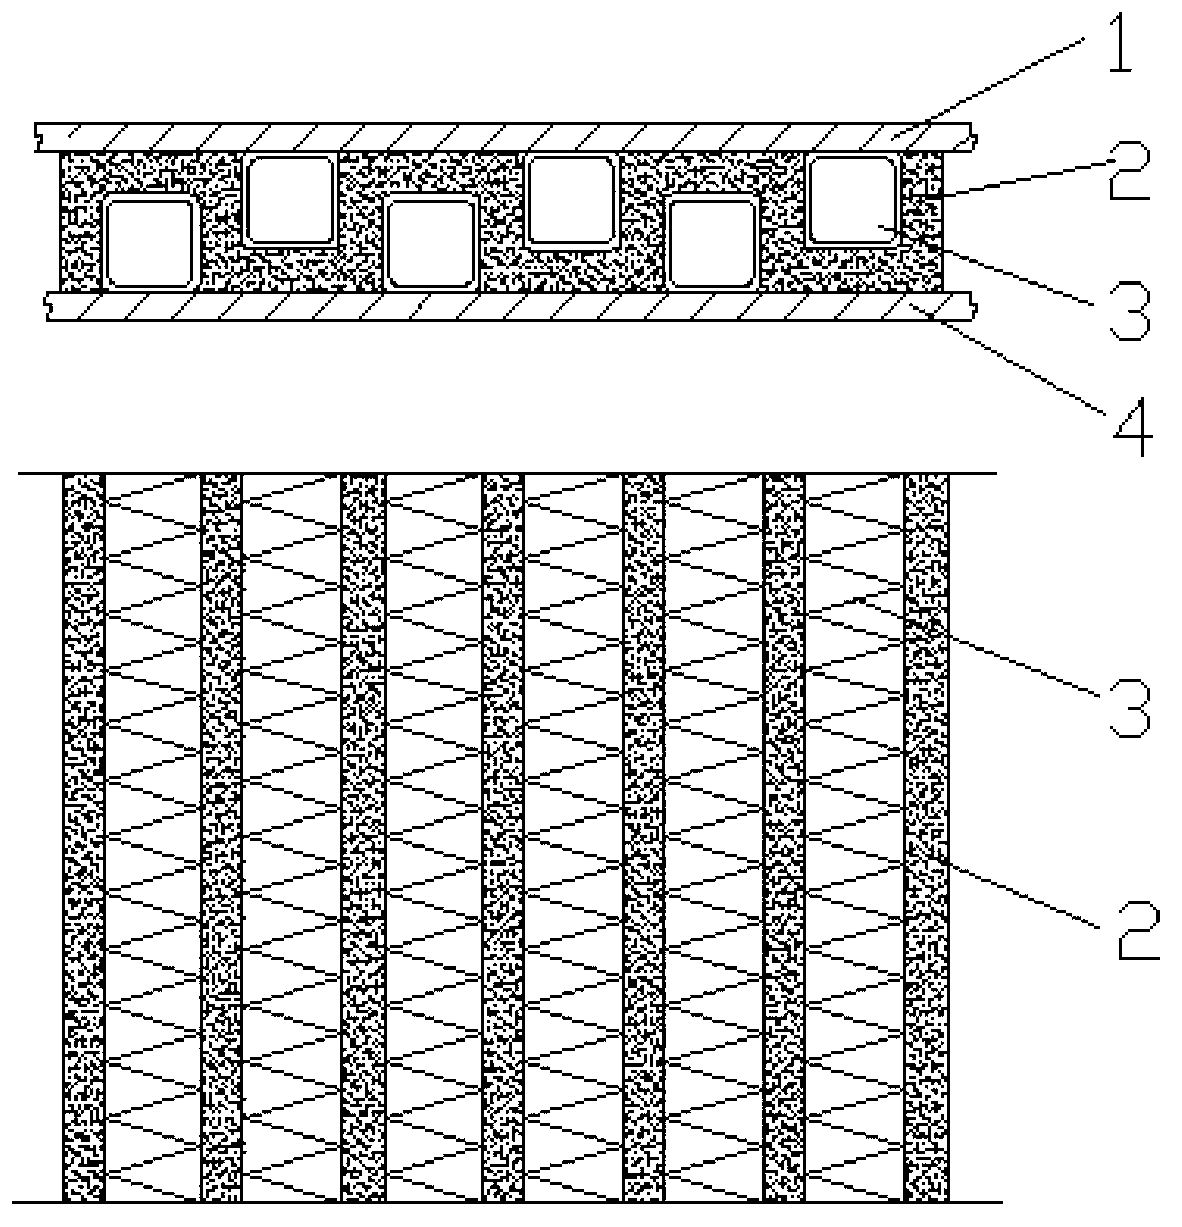 Flexible impact-resistant composite automobile body and production process thereof